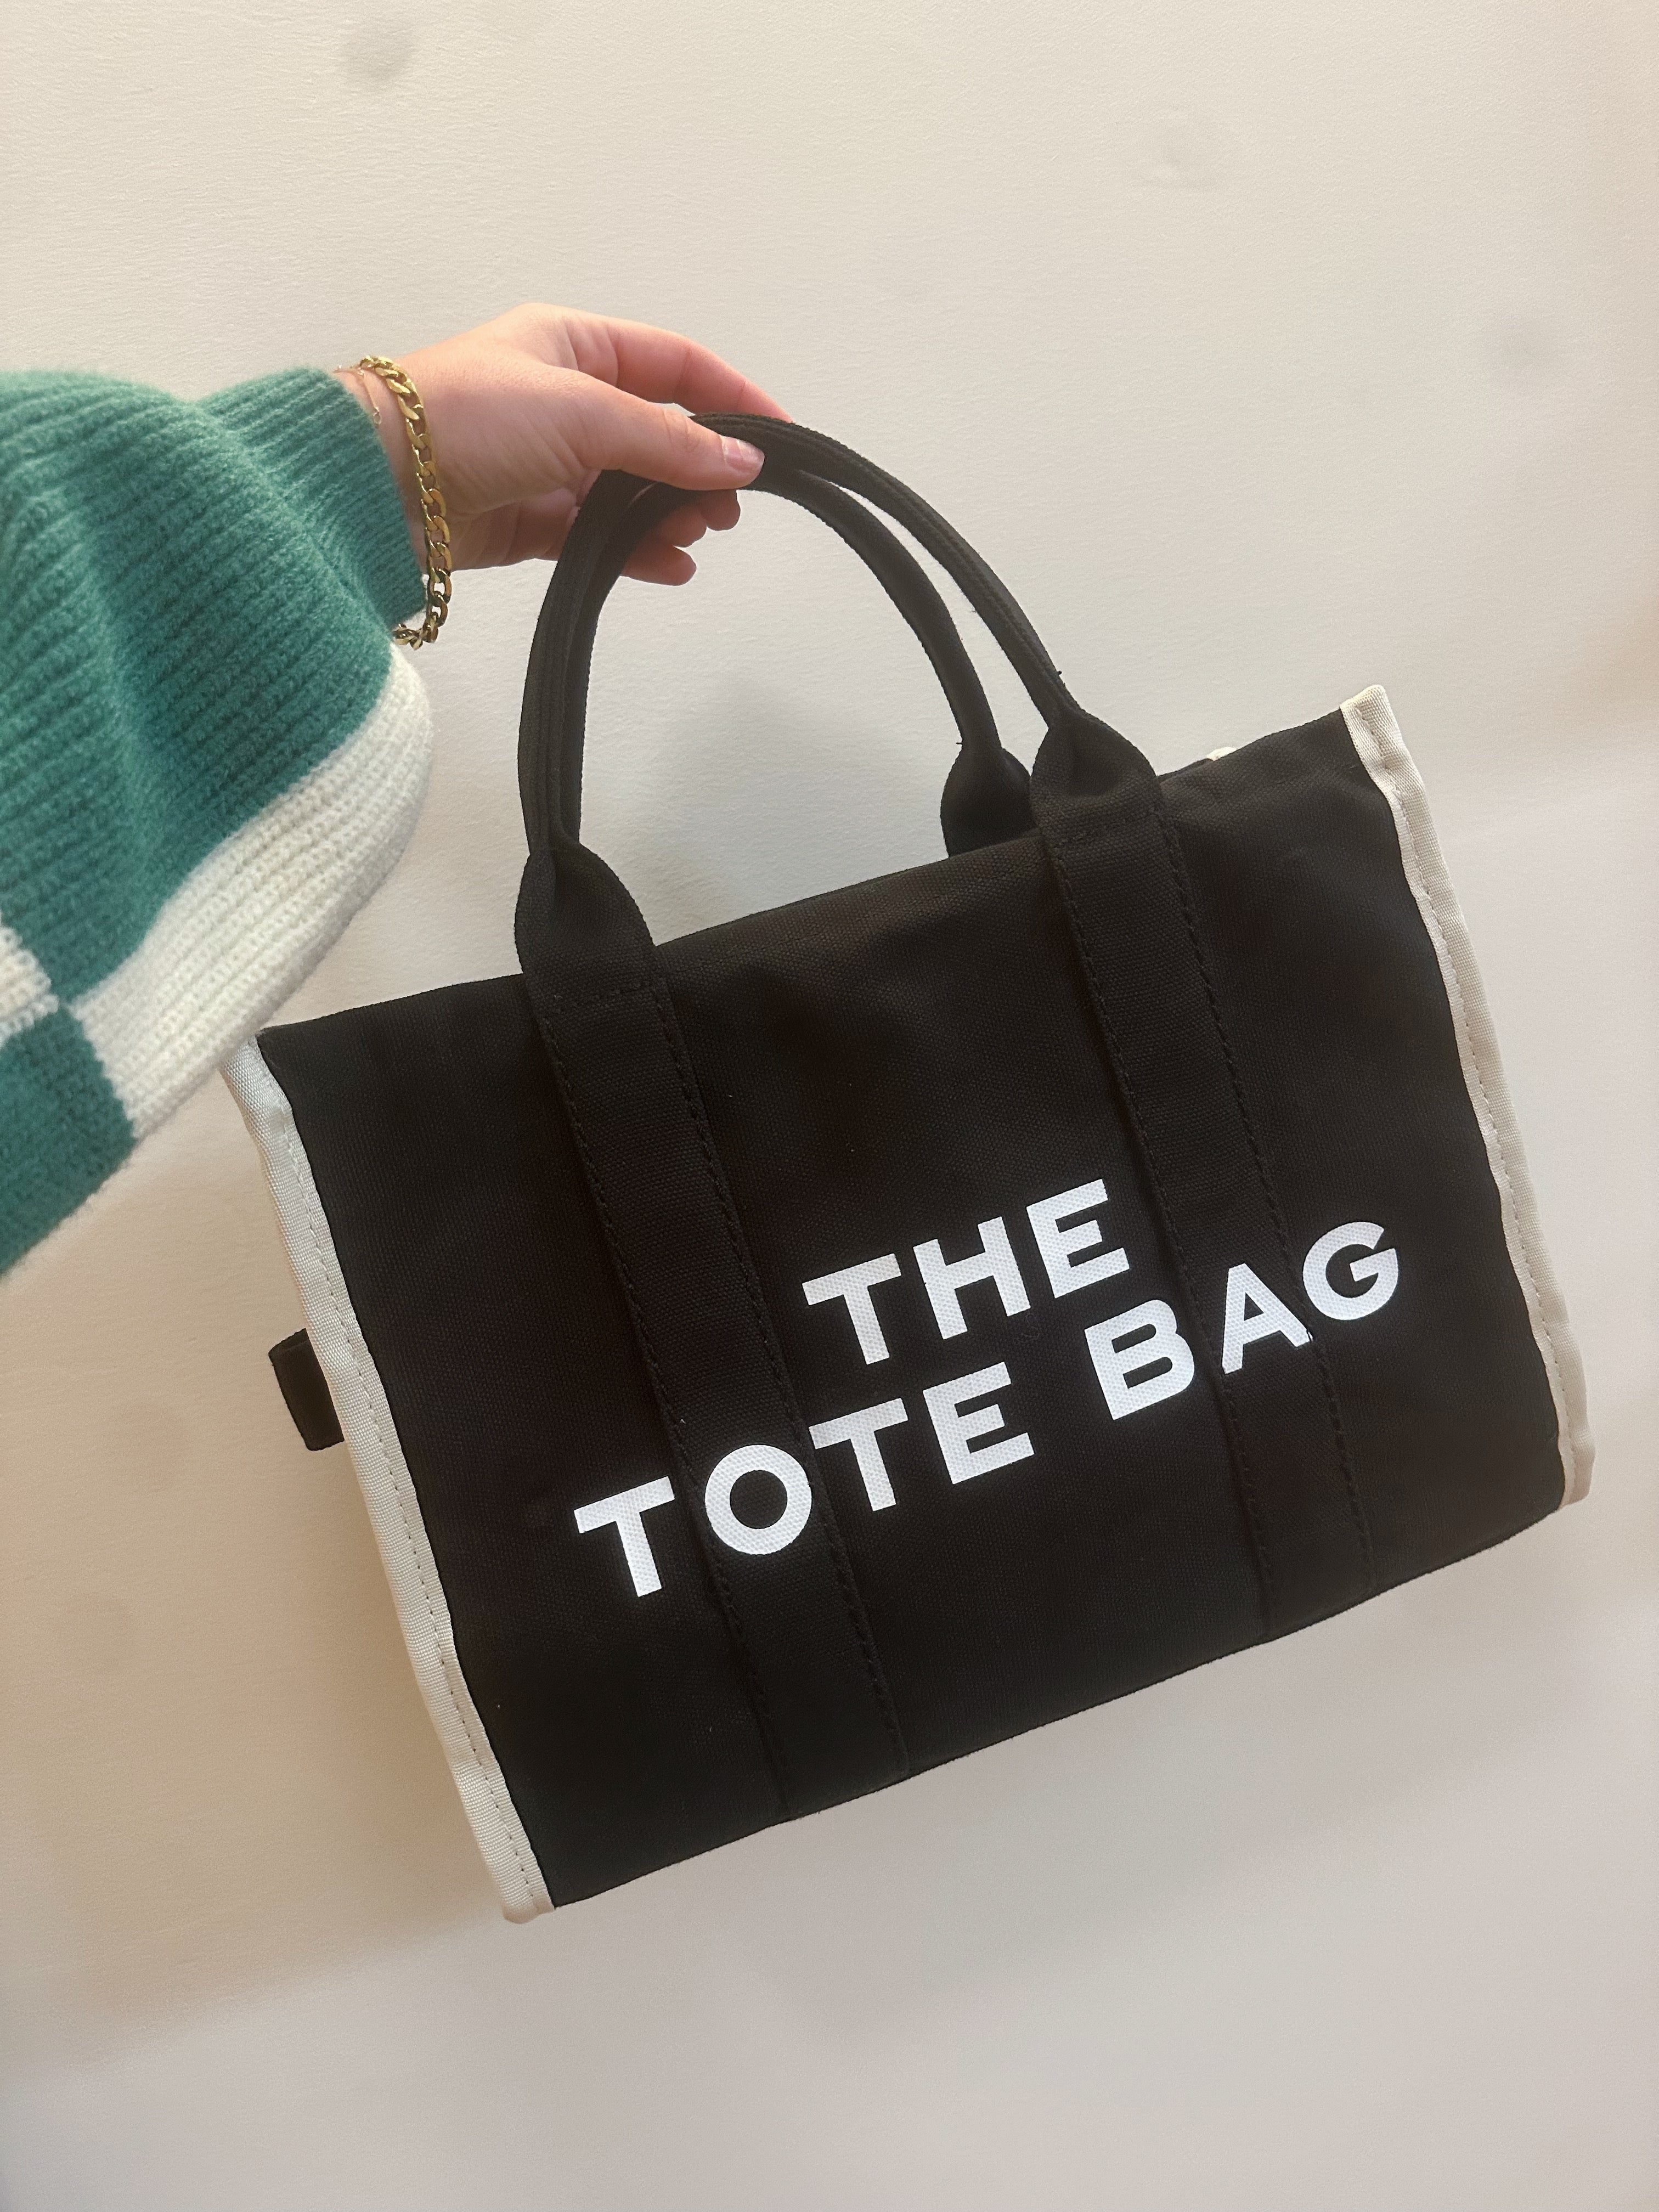 The Tote Bag - Black With White Edges